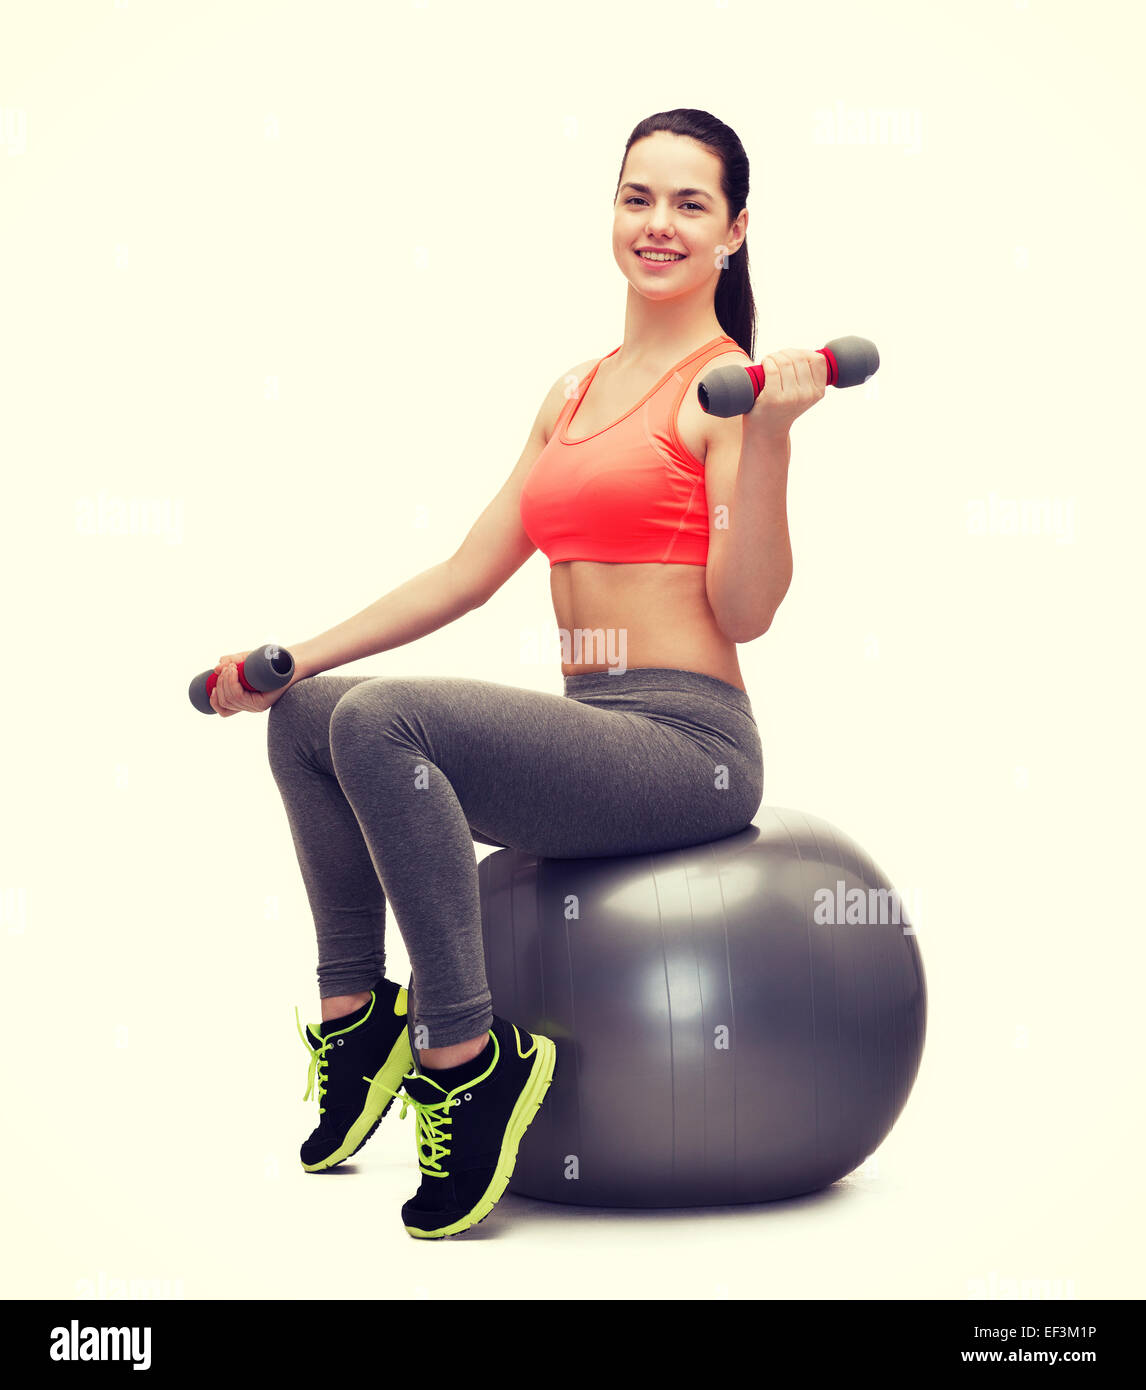 teenager with dumbbells sitting on fitness ball Stock Photo